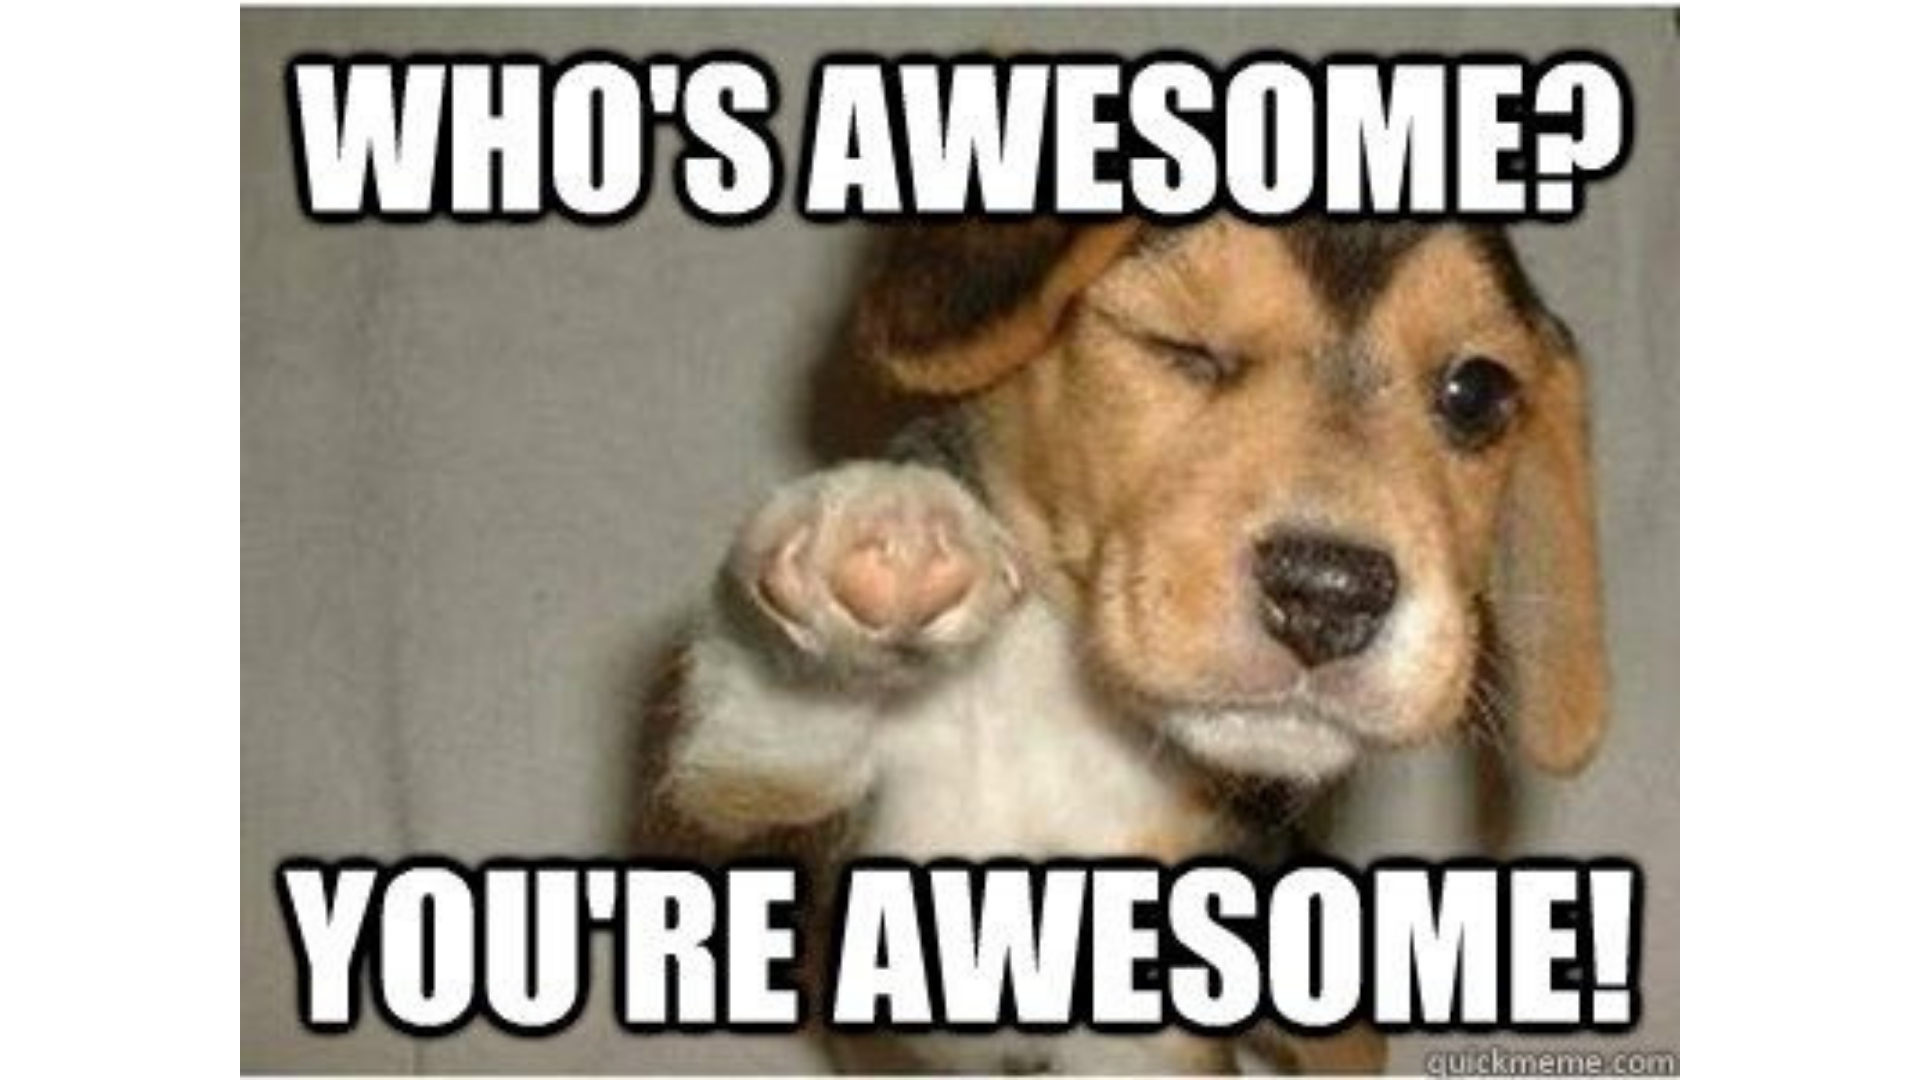 Who's awesome? You're awesome